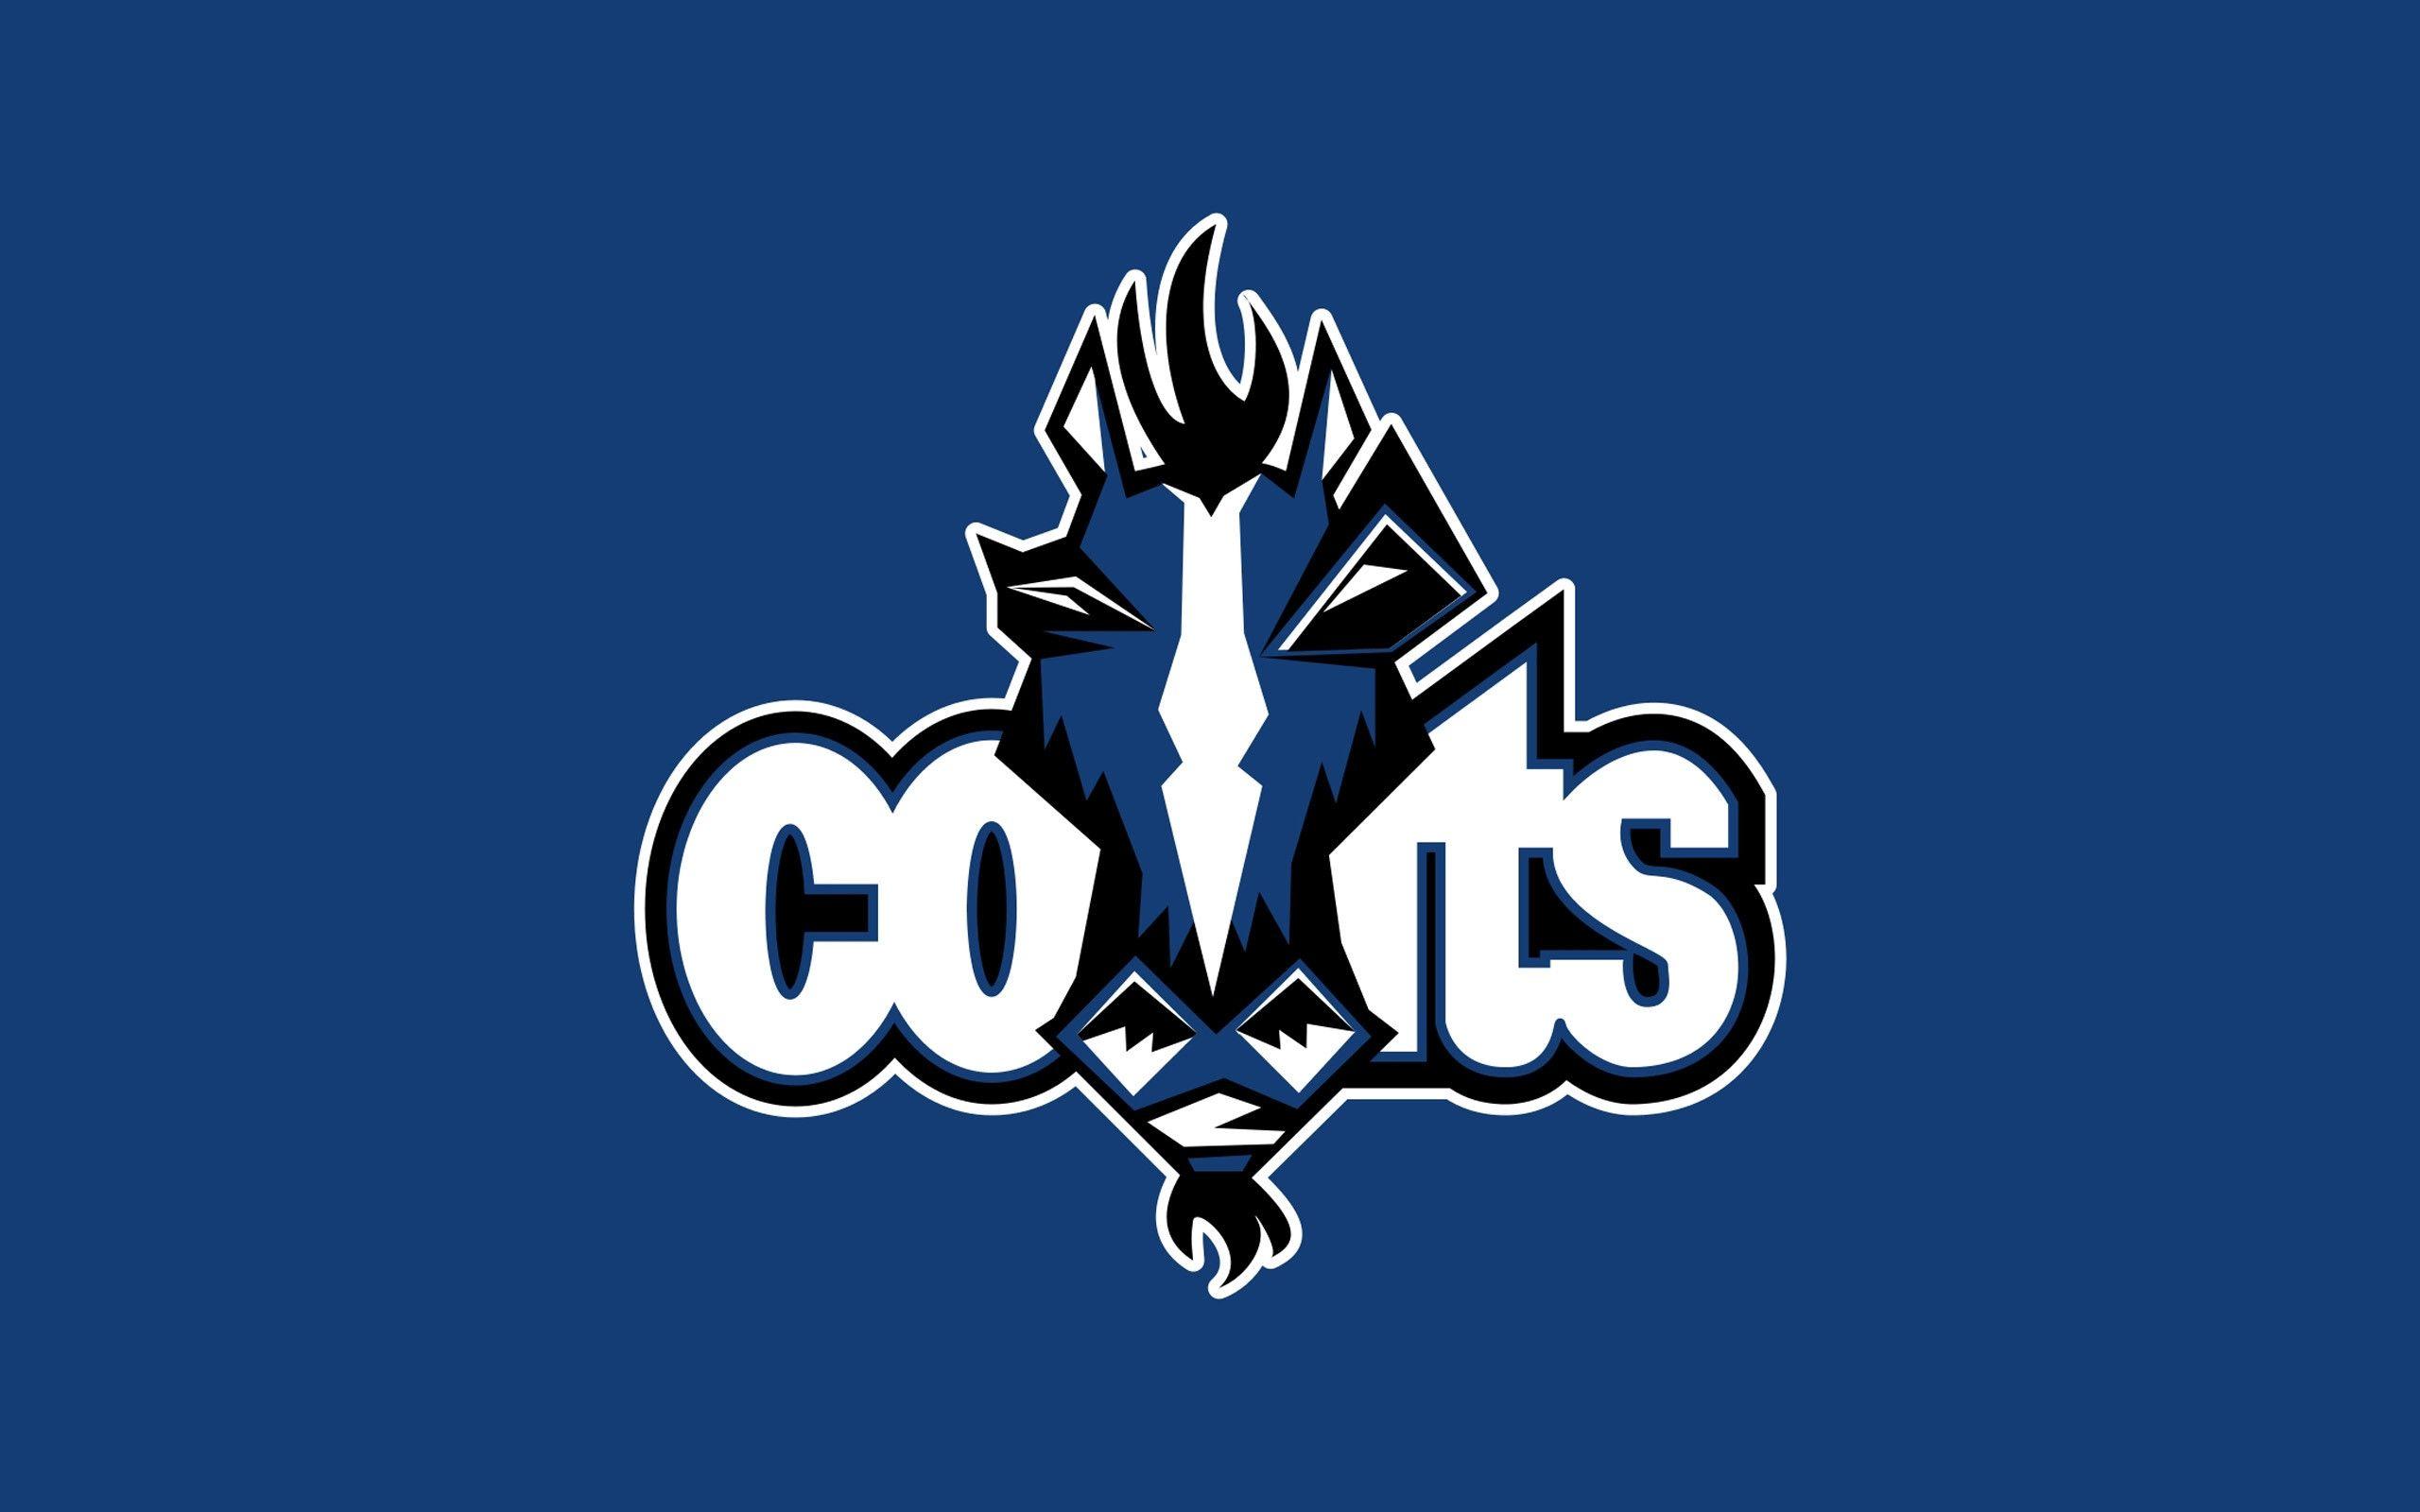 Indianapolis Colts wallpapers backgrounds